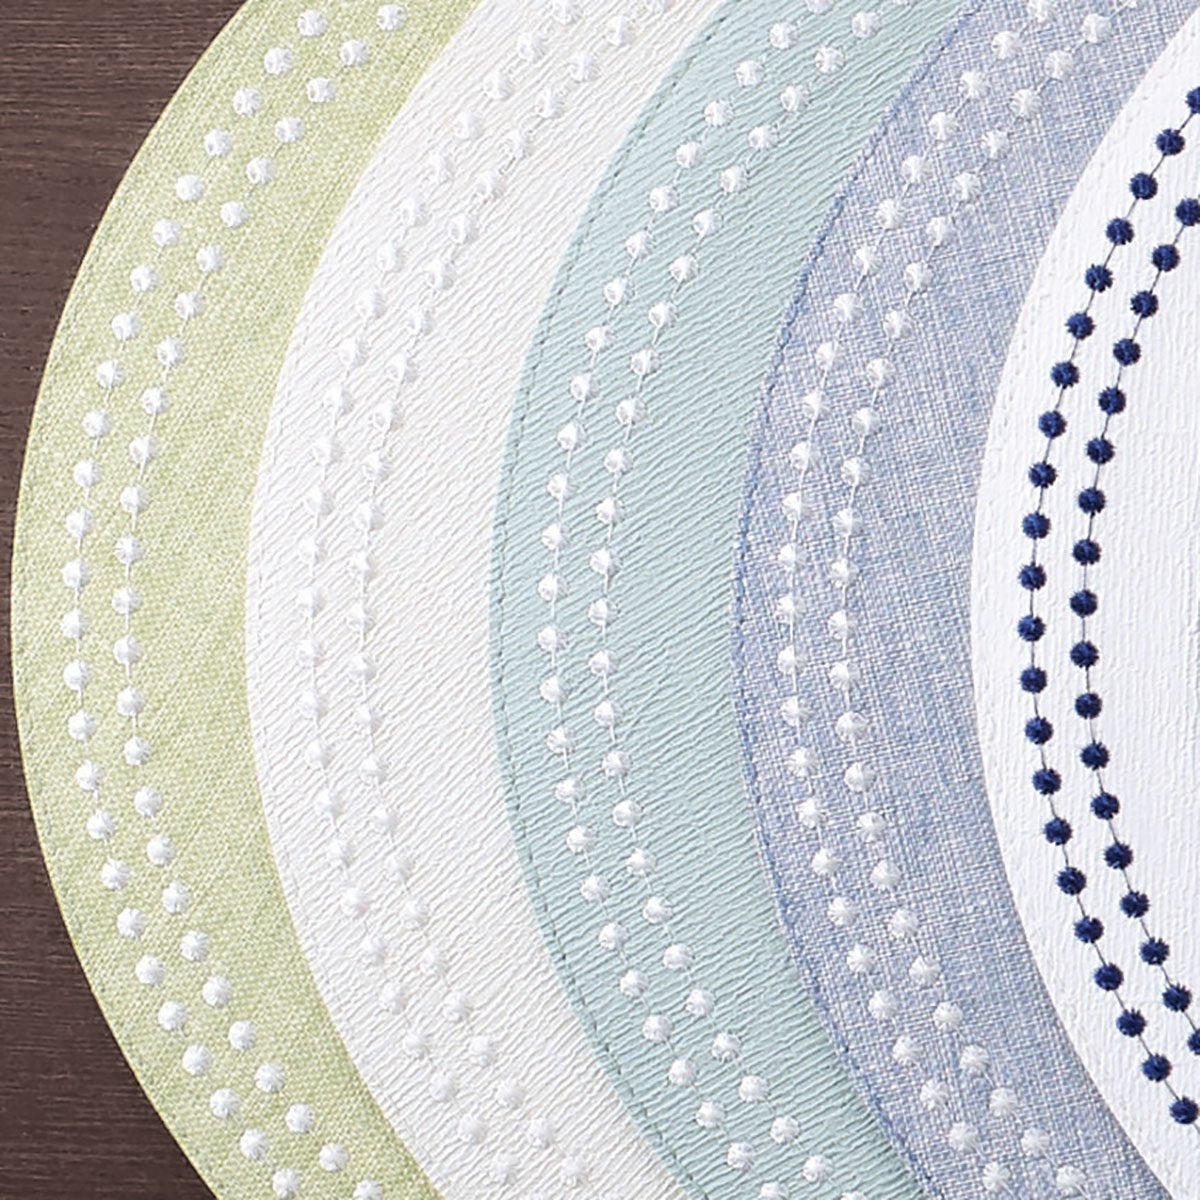 Pearls Placemat, Set of 4